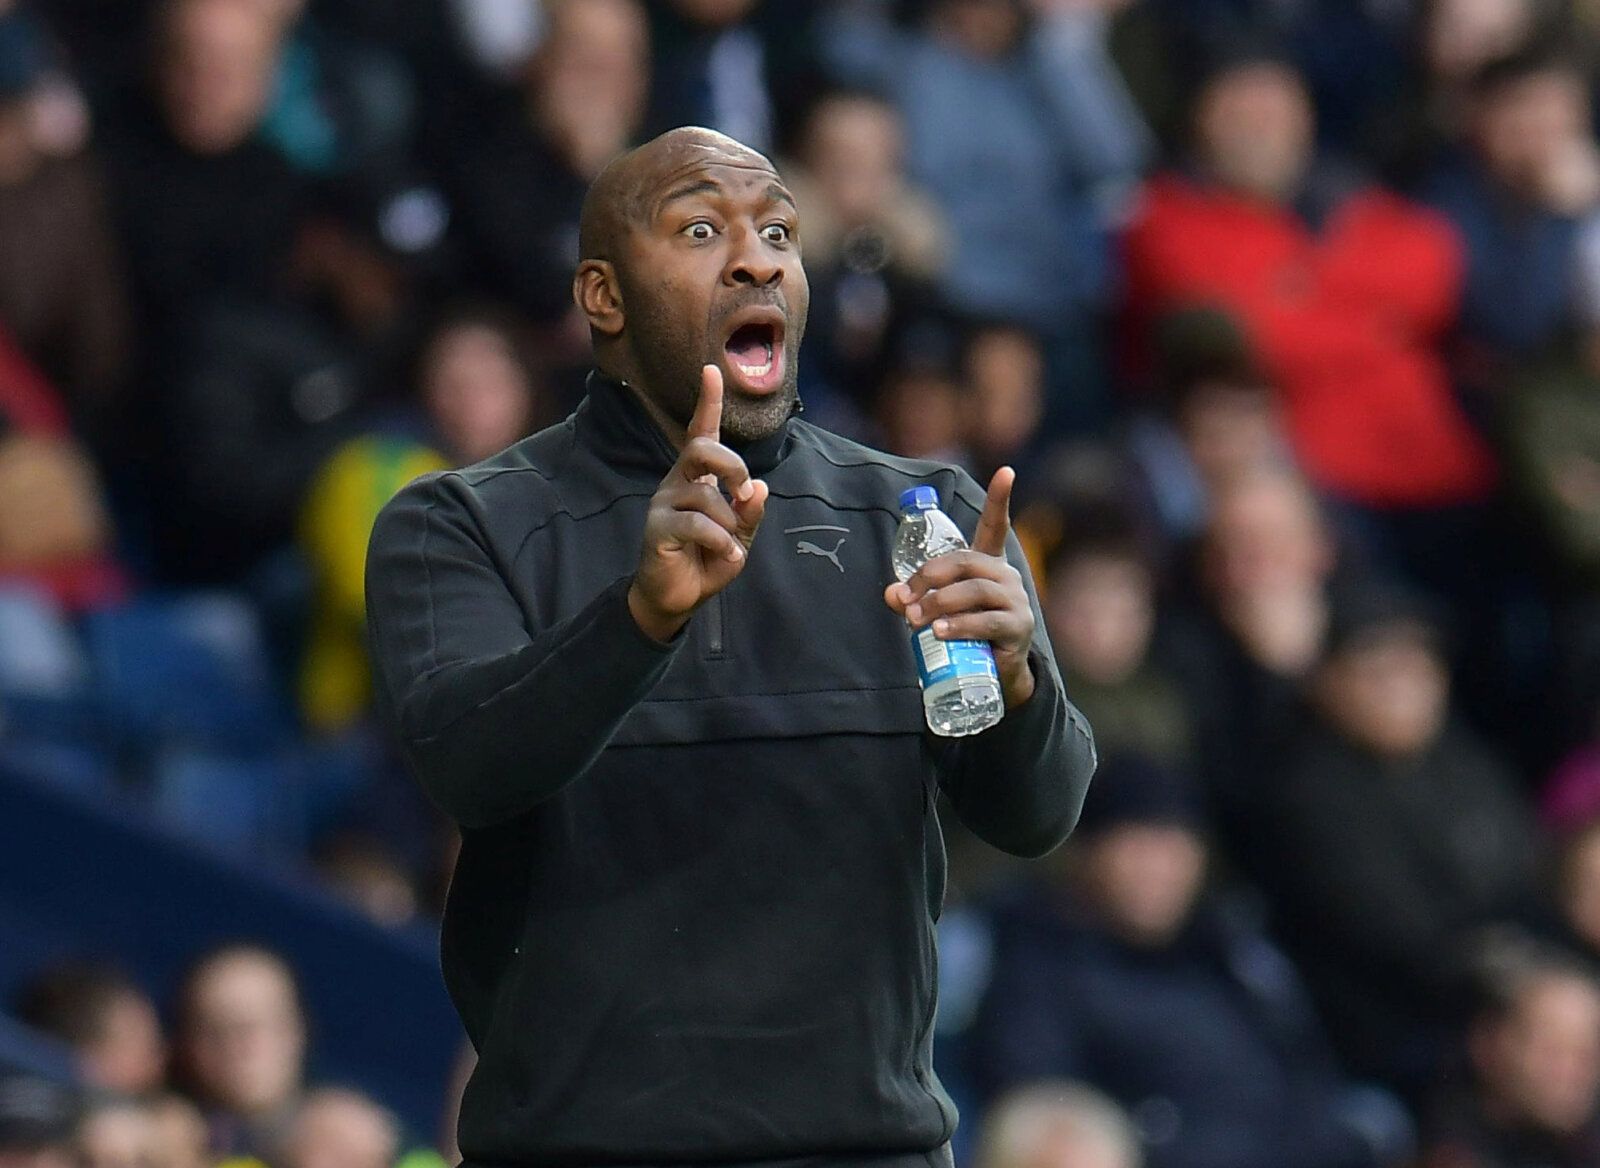 Soccer Football - Championship - West Bromwich Albion v Ipswich Town - The Hawthorns, West Bromwich, Britain - March 9, 2019   West Brom manager Darren Moore gives instructions during the match    Action Images/Paul Burrows    EDITORIAL USE ONLY. No use with unauthorized audio, video, data, fixture lists, club/league logos or "live" services. Online in-match use limited to 75 images, no video emulation. No use in betting, games or single club/league/player publications.  Please contact your acco